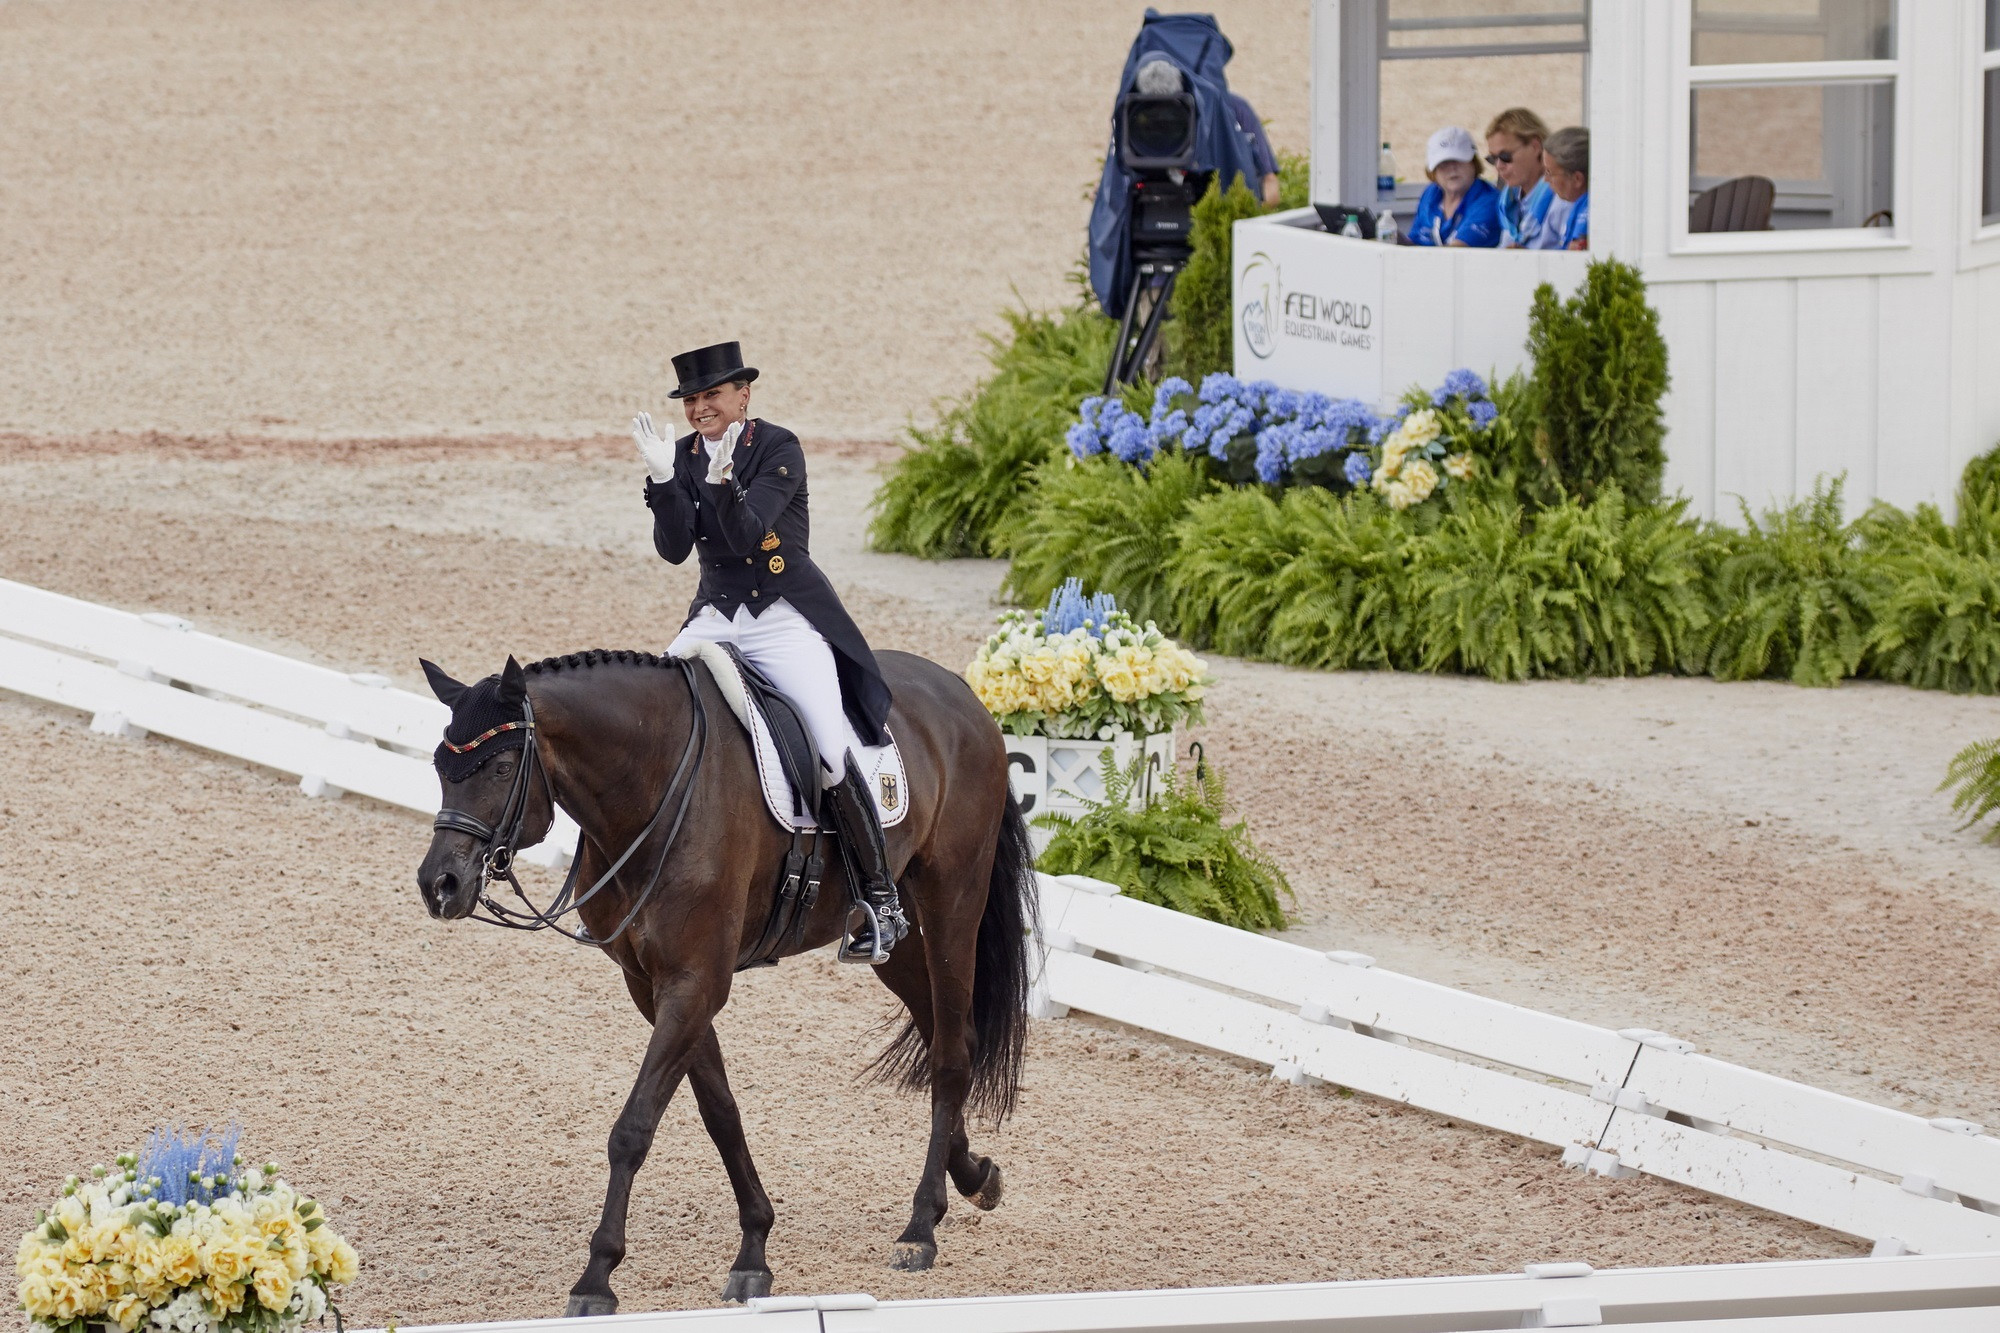 Germany enjoyed a strong start to the team dressage competition ©FEI